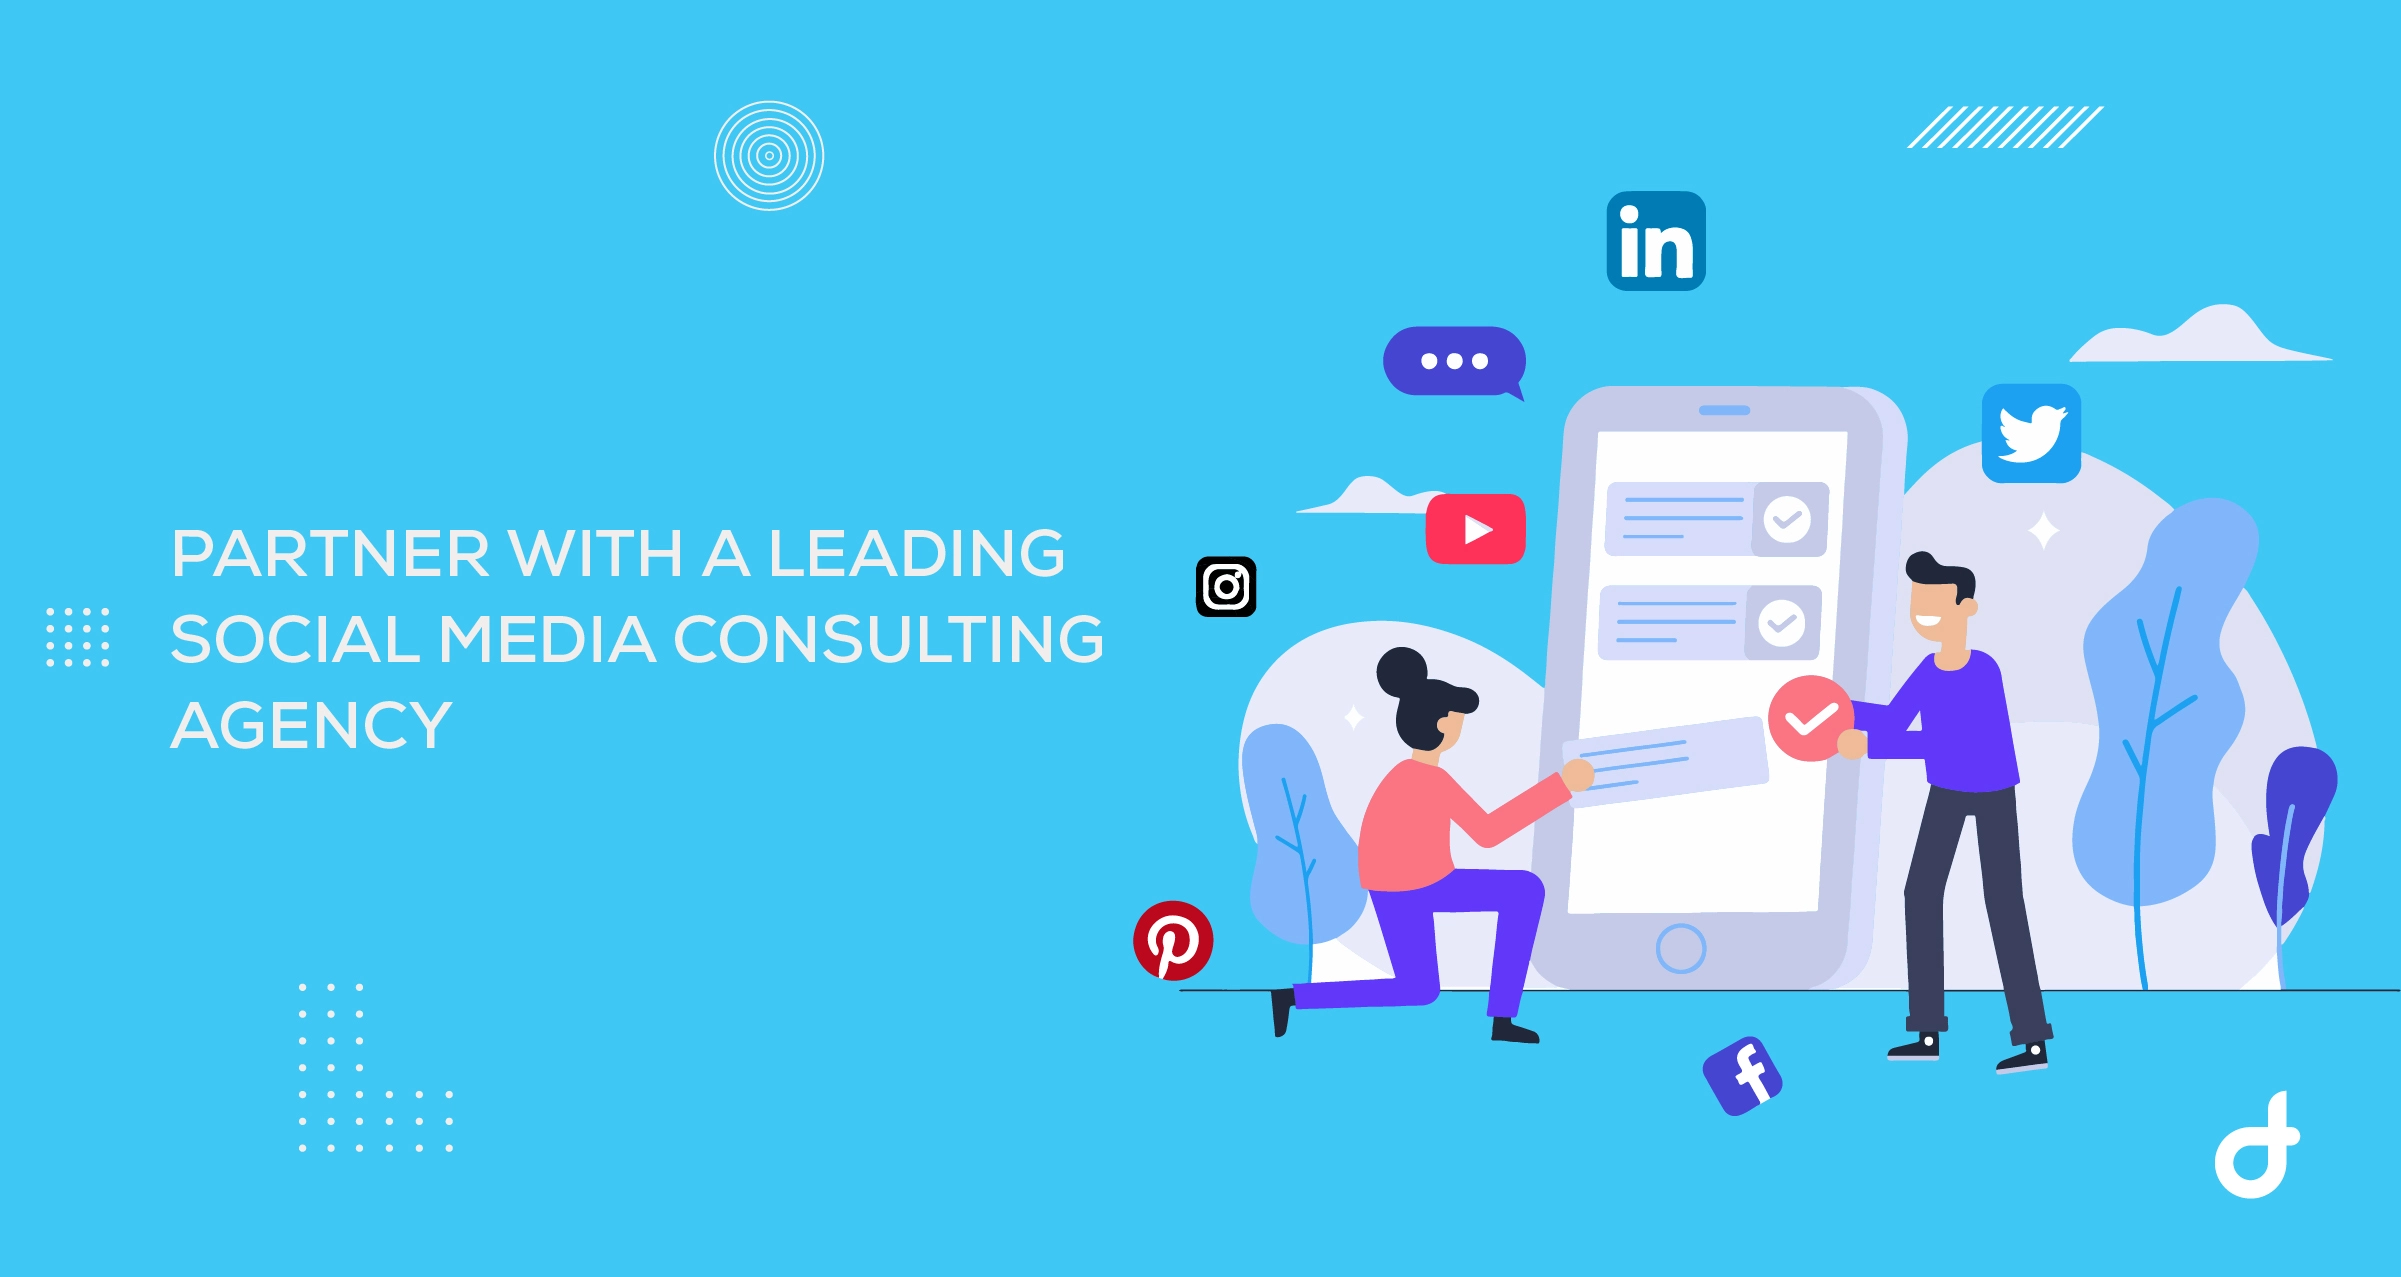 Partner with a Leading Social Media Consulting Agency